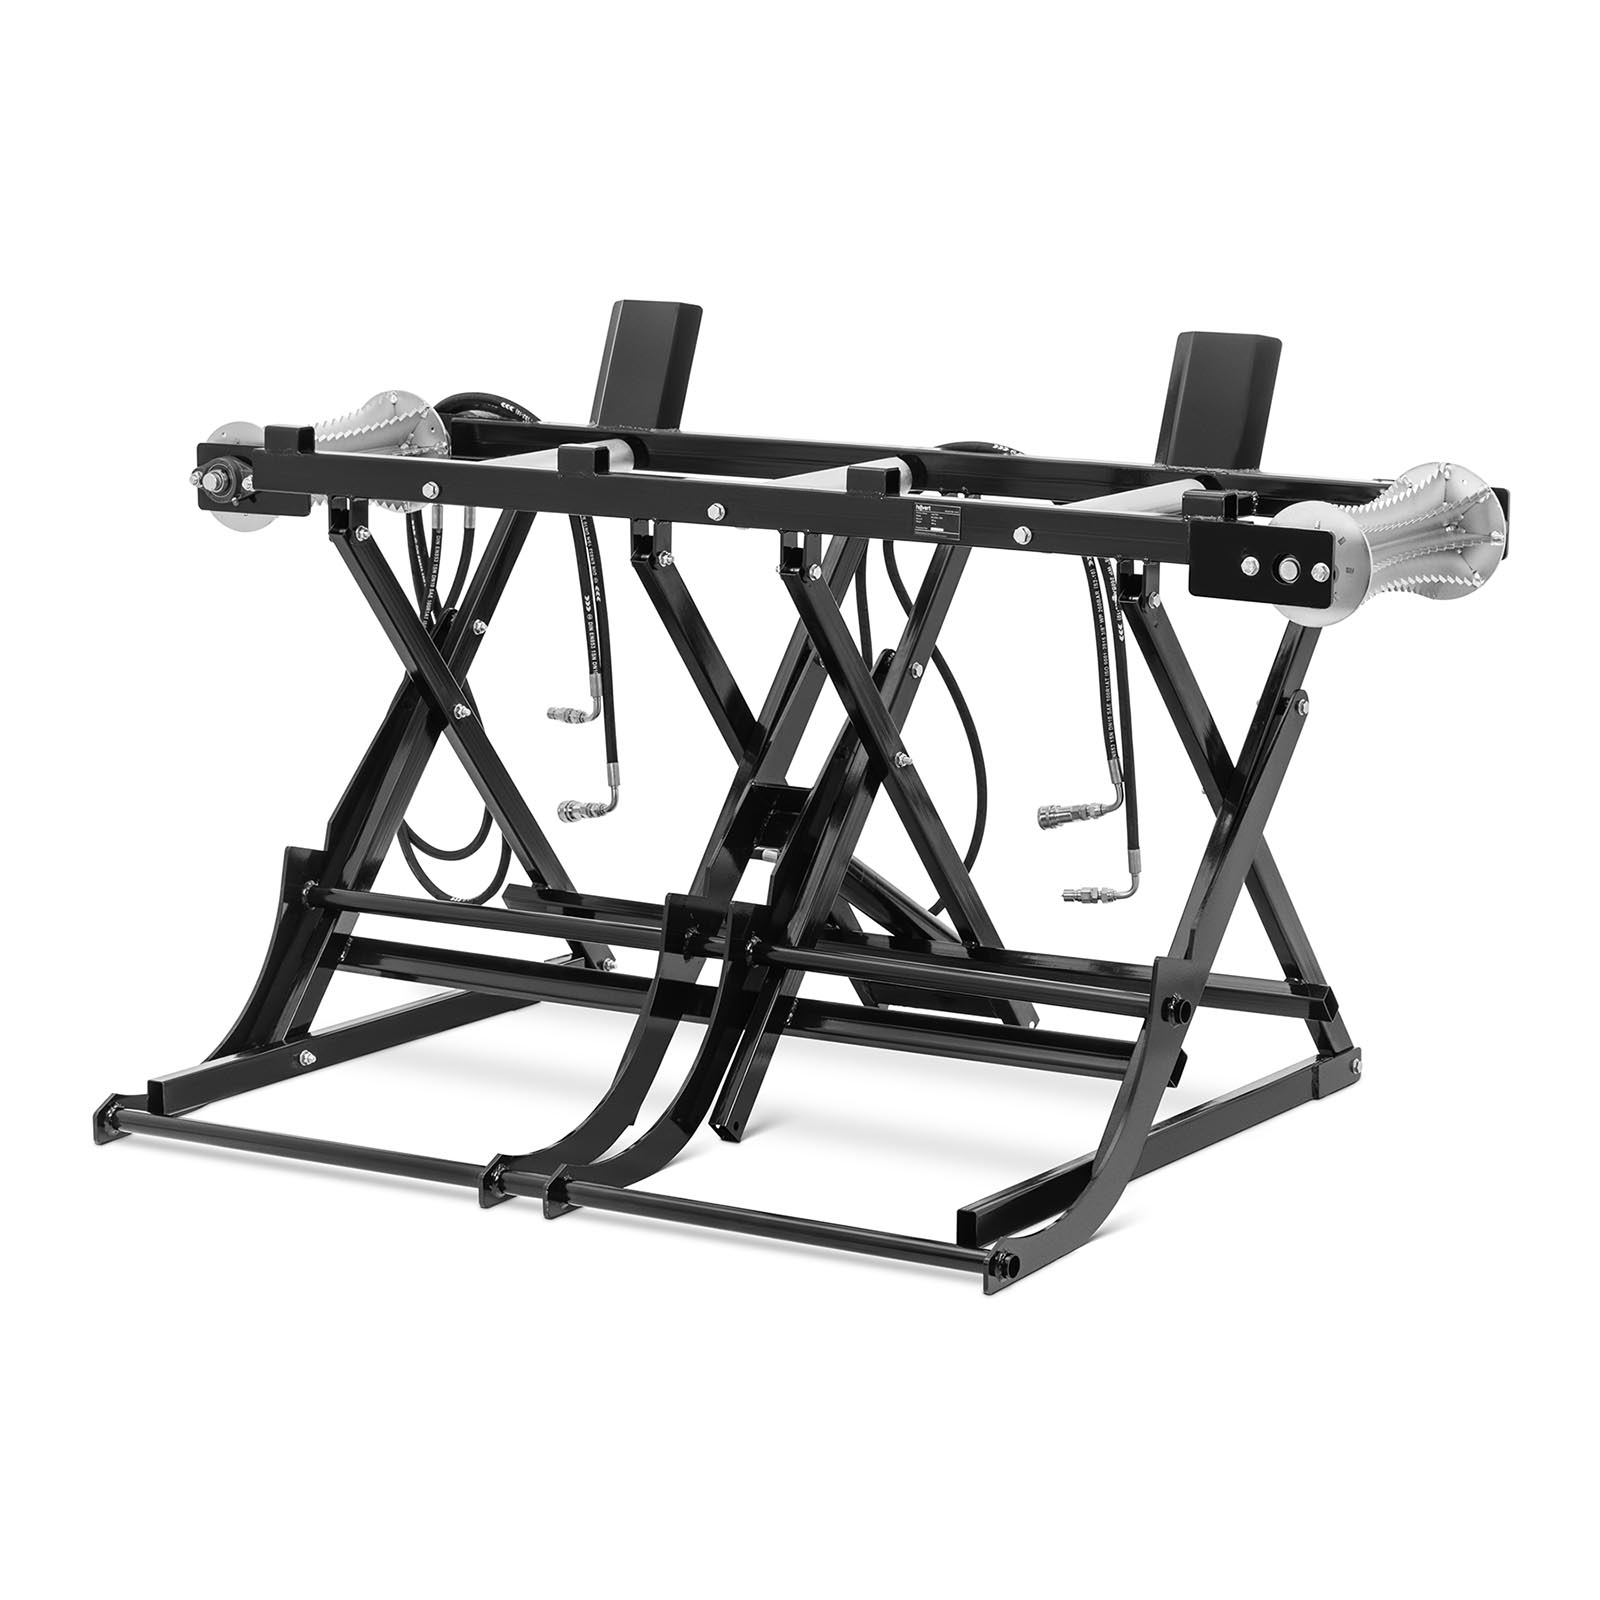 Log lifter - hydraulic - up to 180 kg - steel